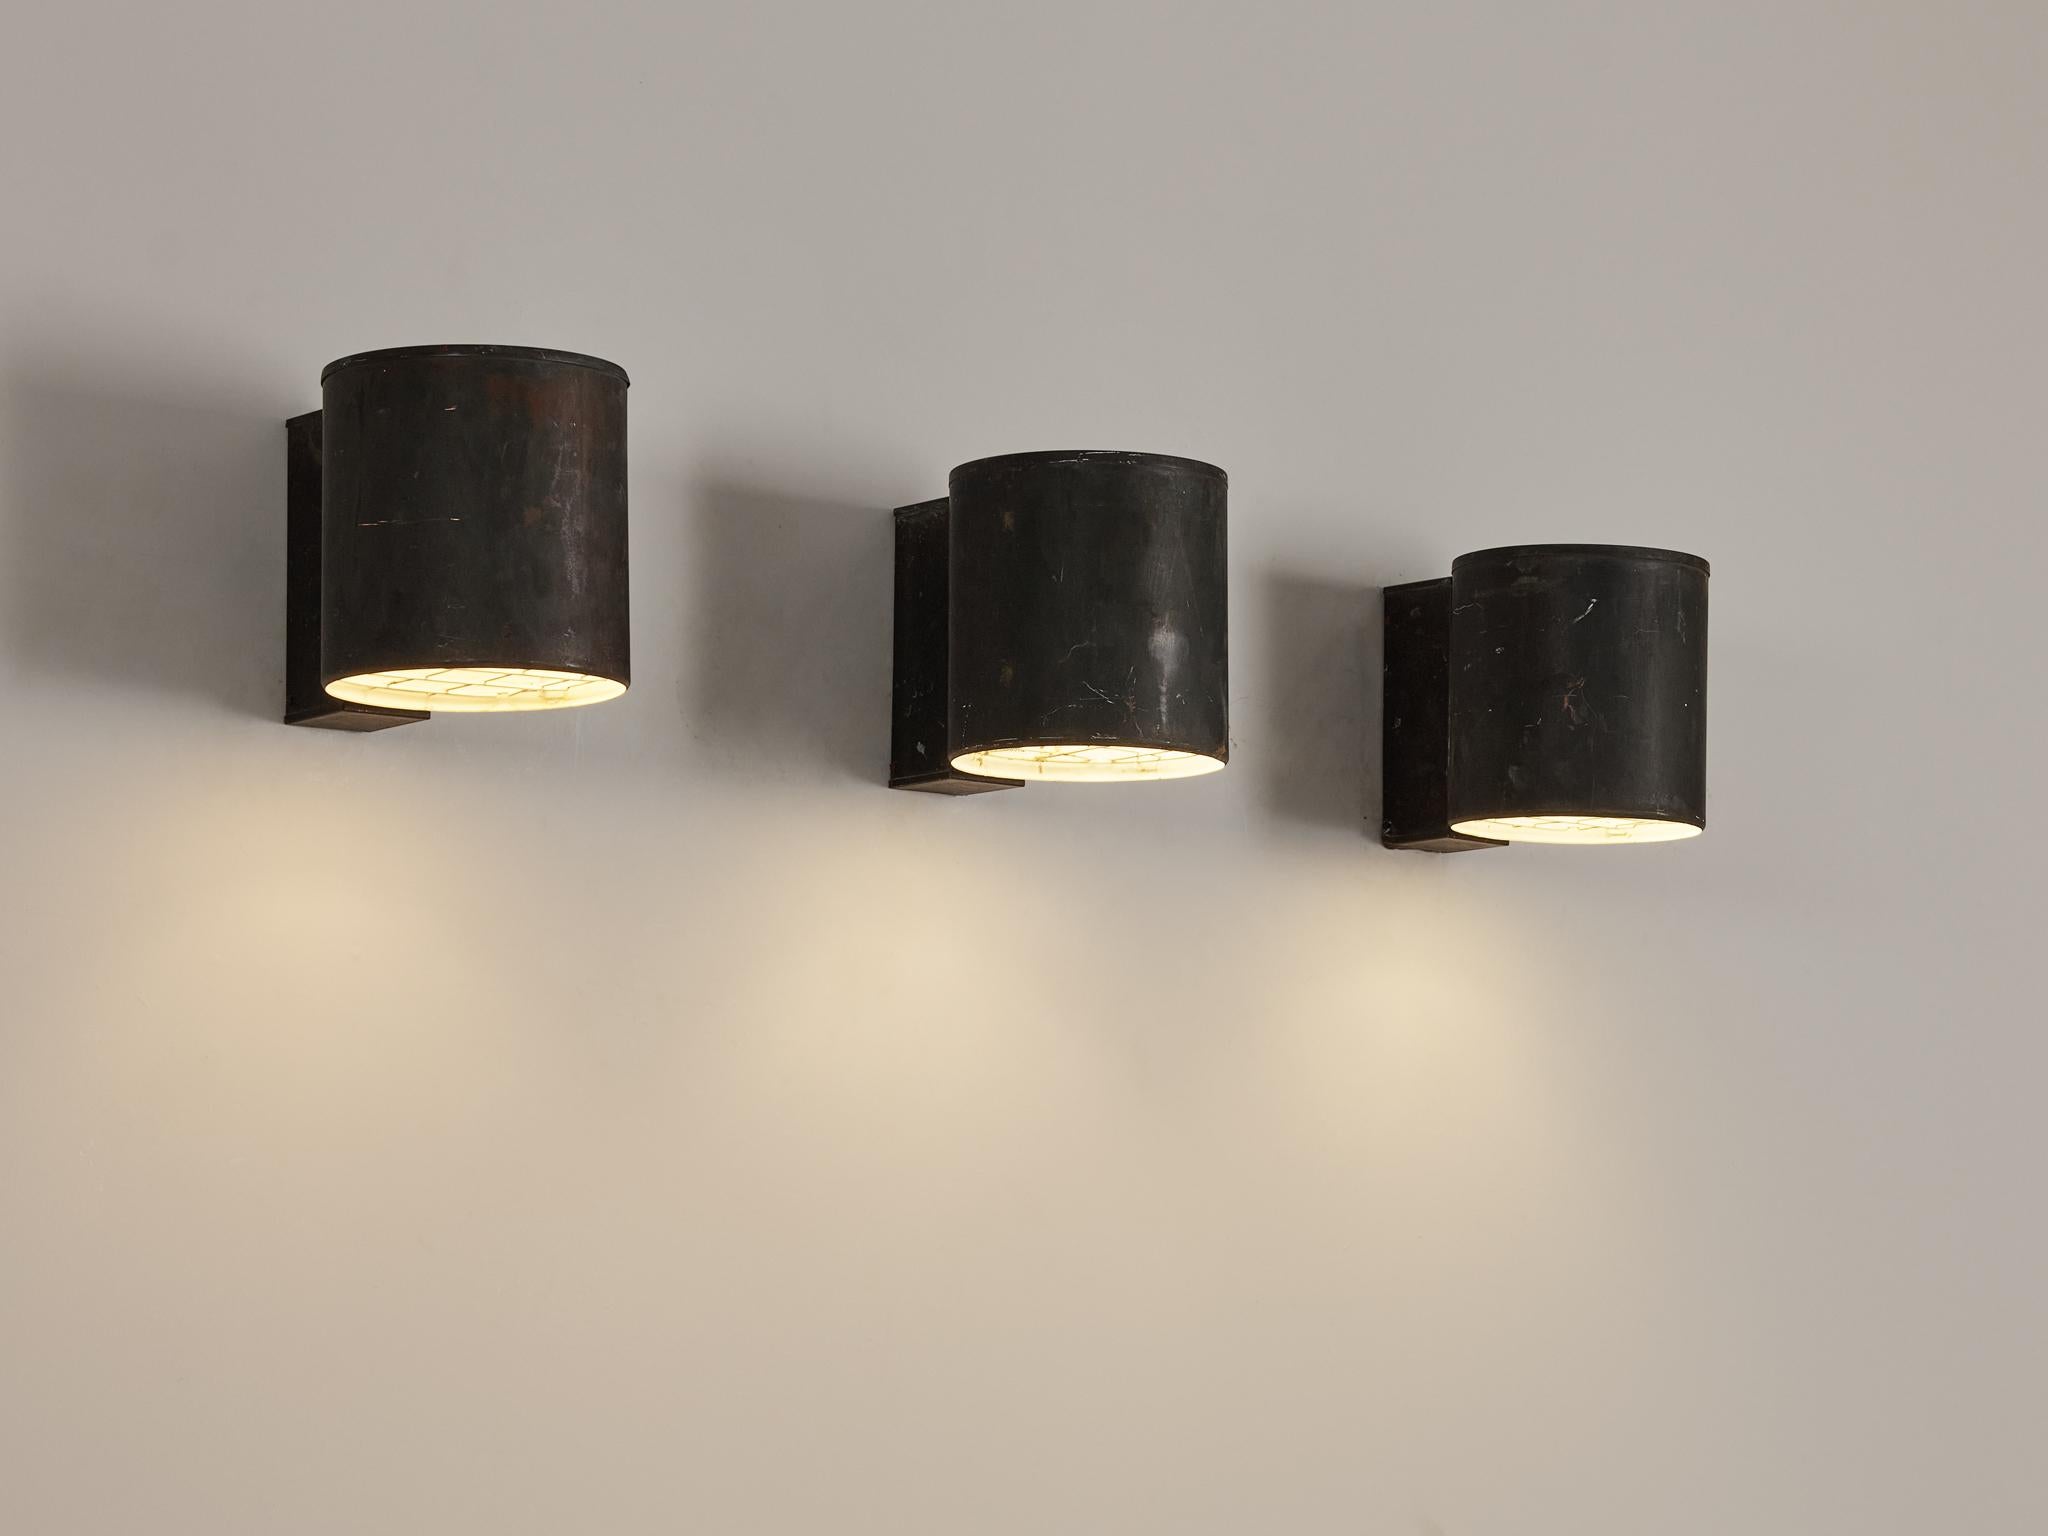 Falkenbergs Belysning, large wall lamps, patinated copper, coated steel, Sweden, 1960s

Grand Swedish wall lights in patinated copper. The cylindric shade directs the light downwards. The authentic look of the patinated copper creates a vividly play